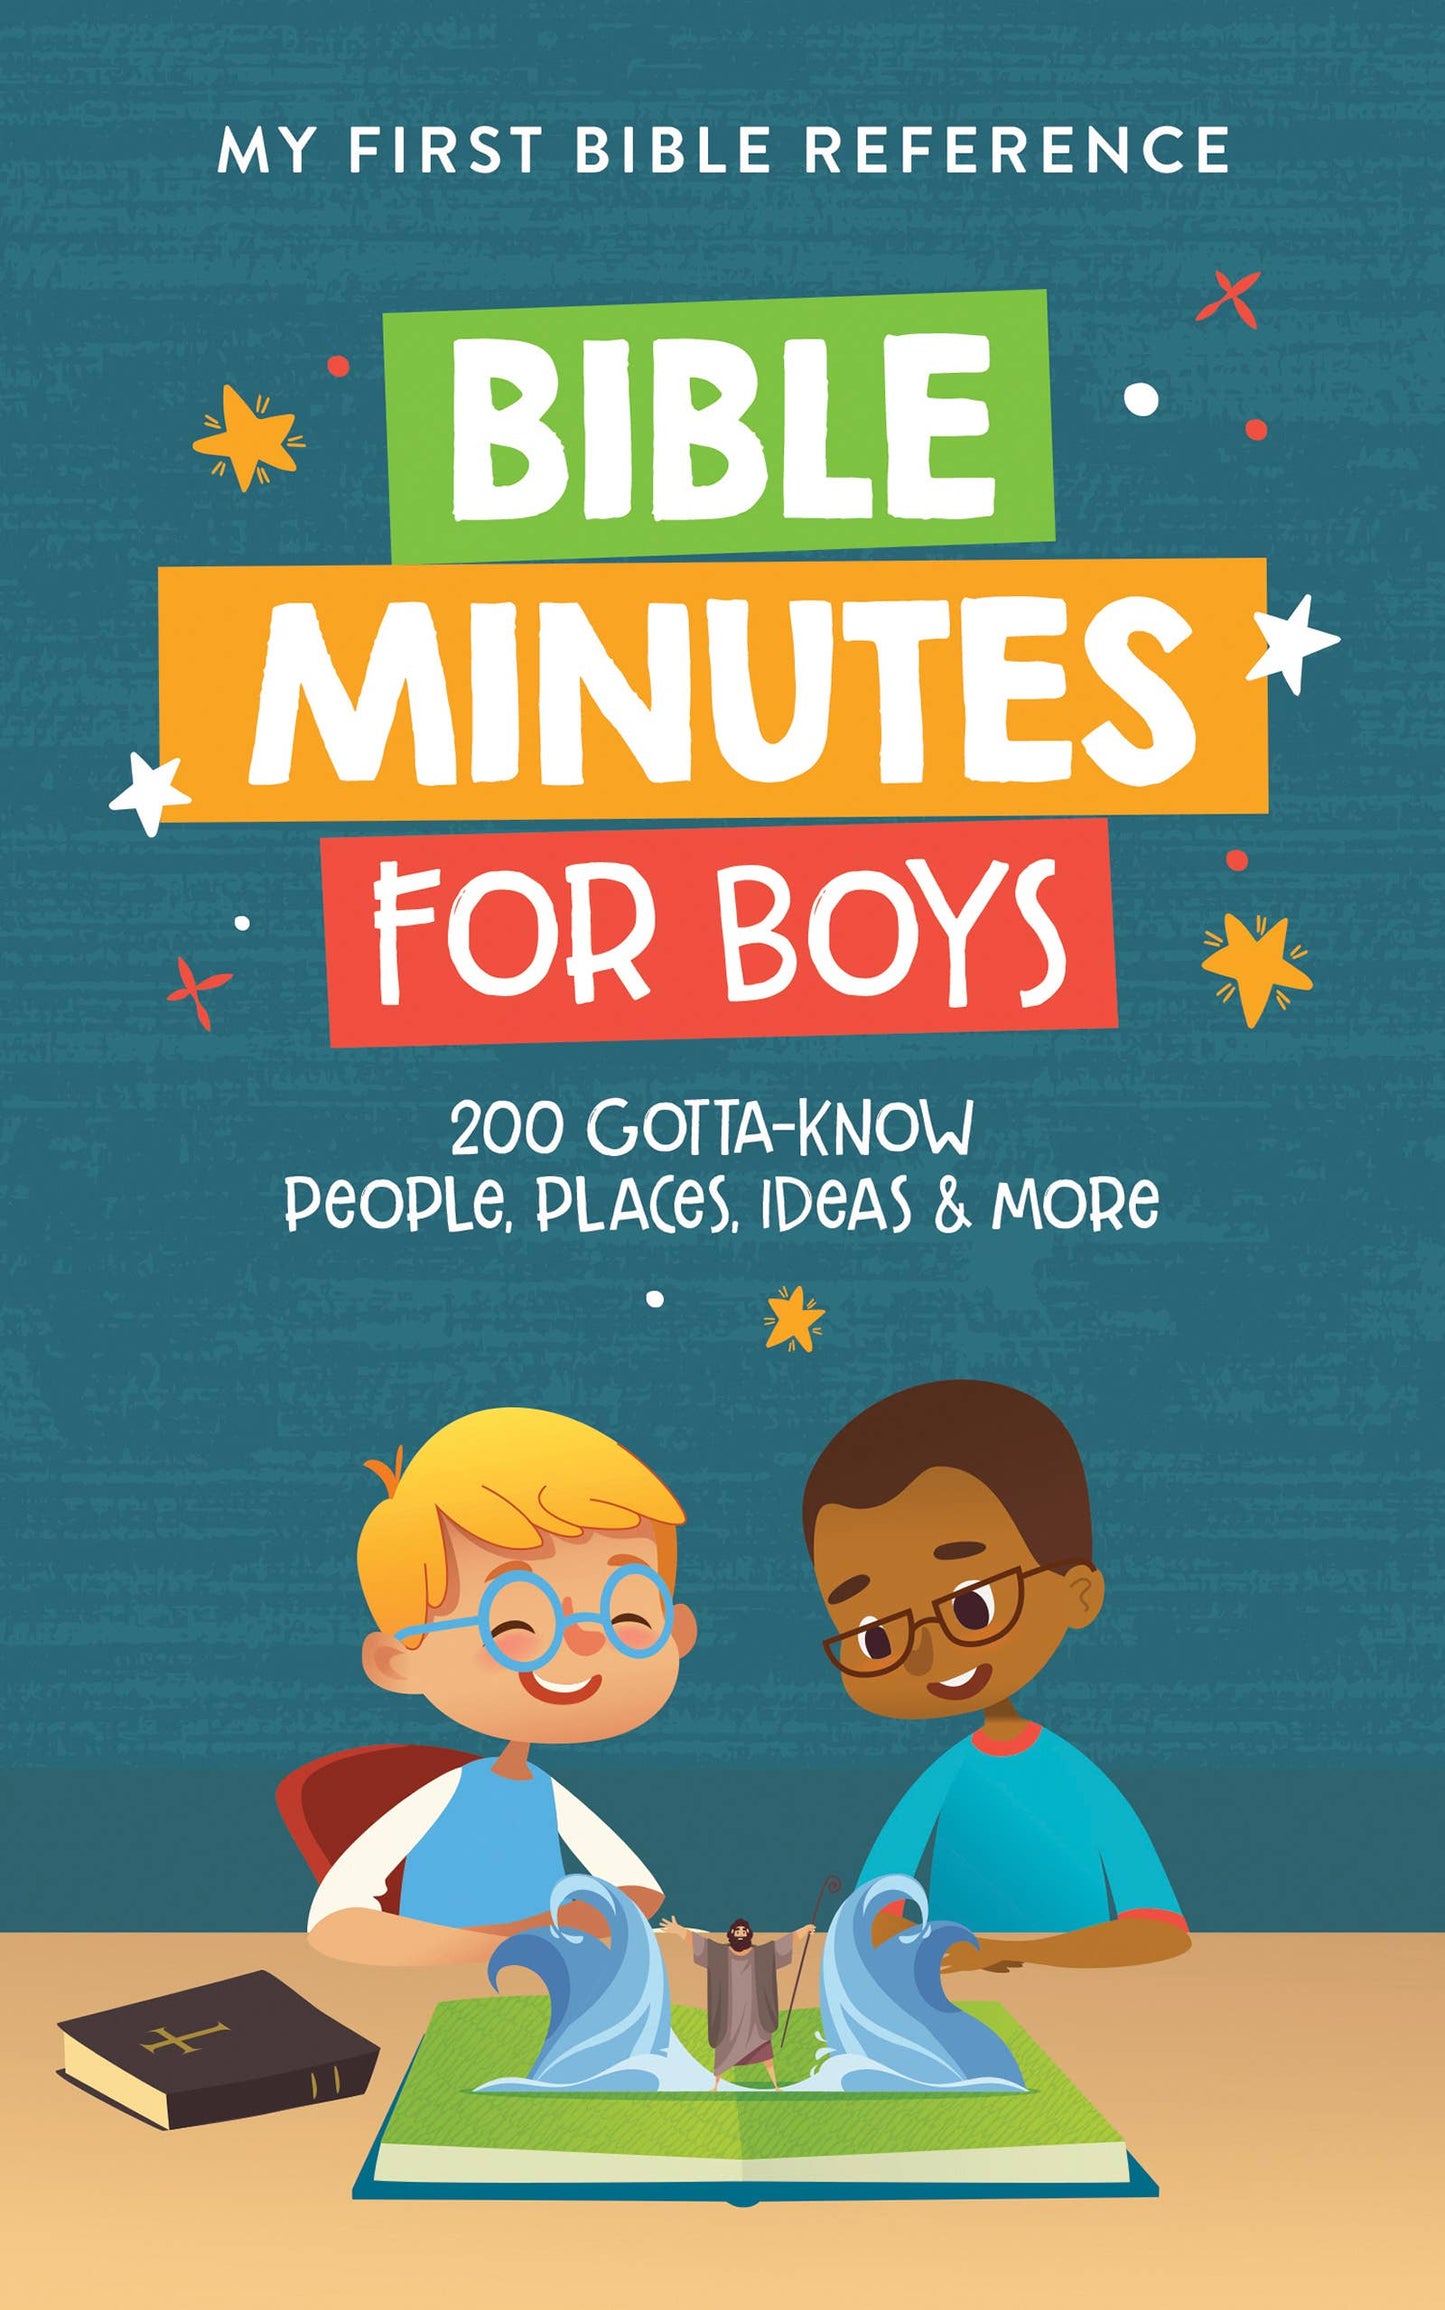 Bible Minutes for Boys